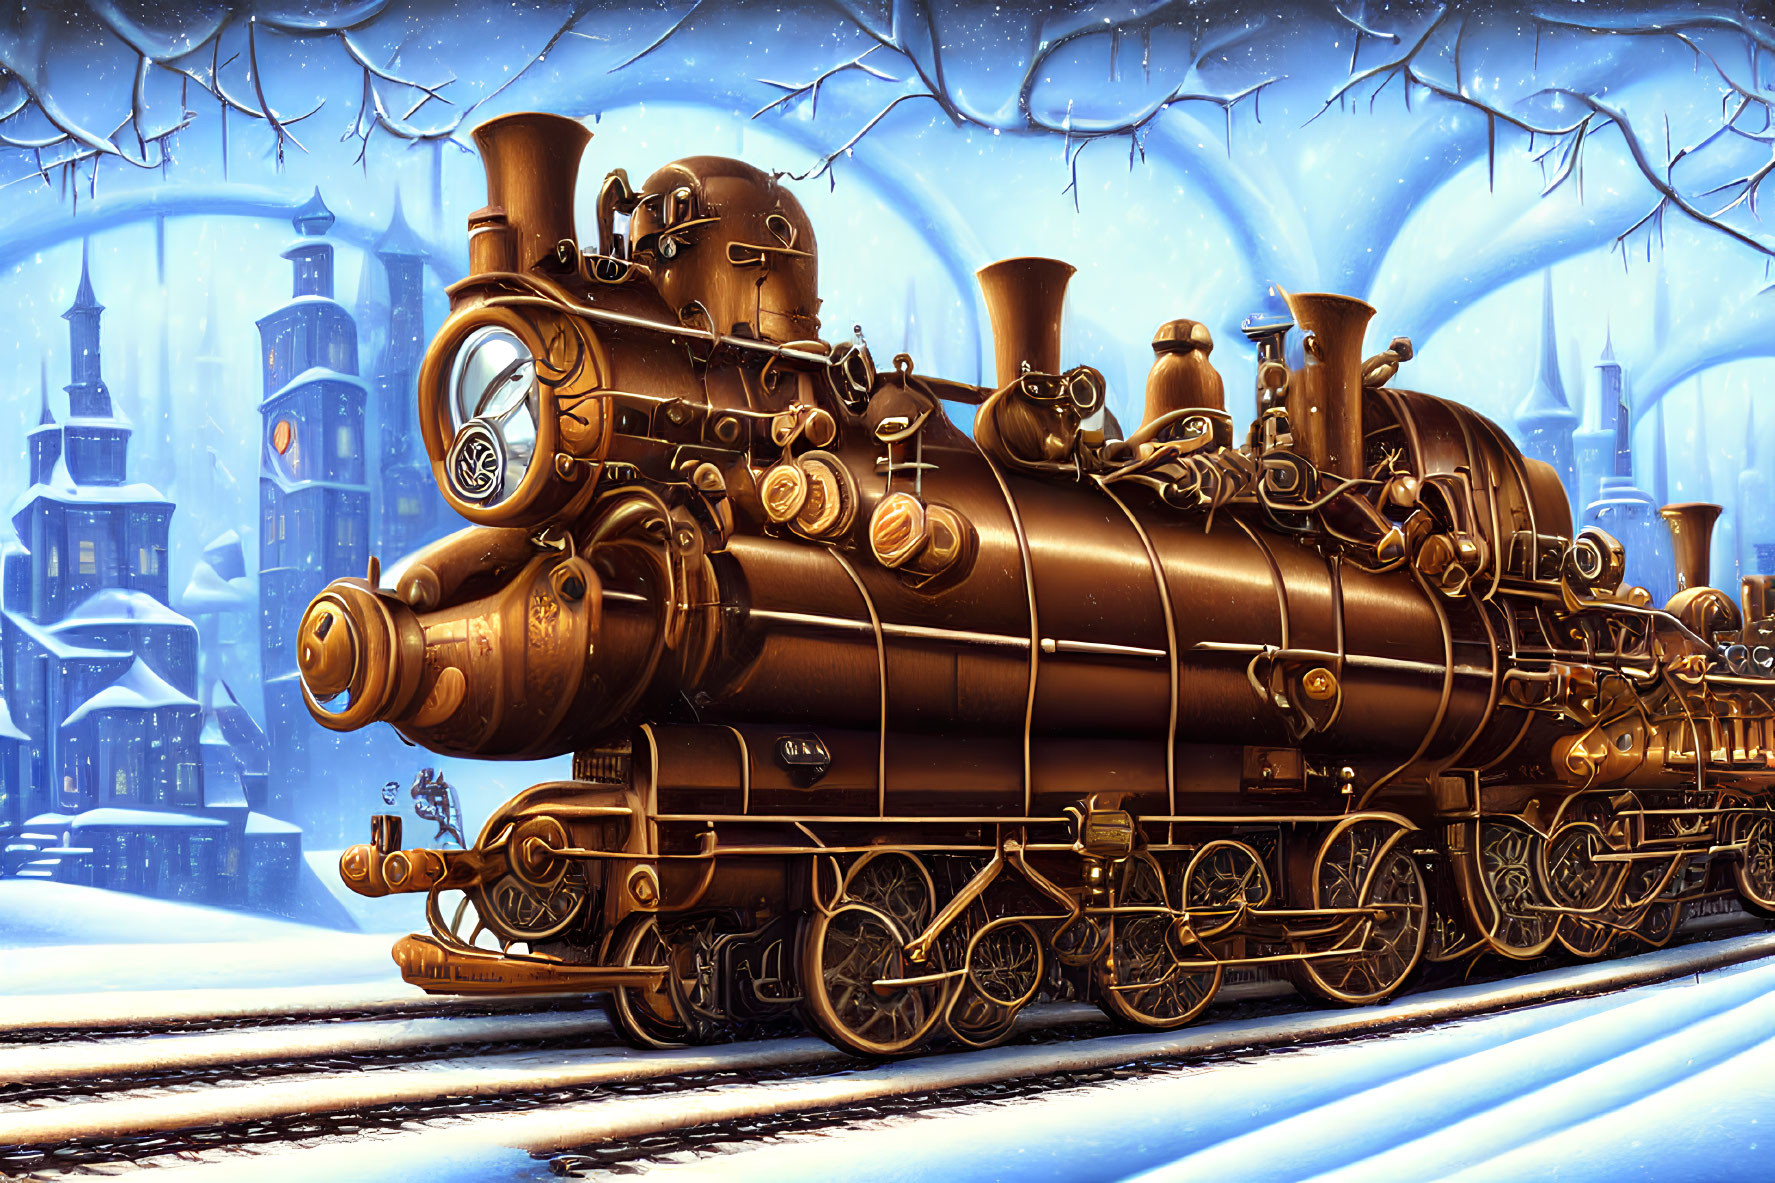 Steampunk train on snowy tracks with golden hues and icy blue buildings